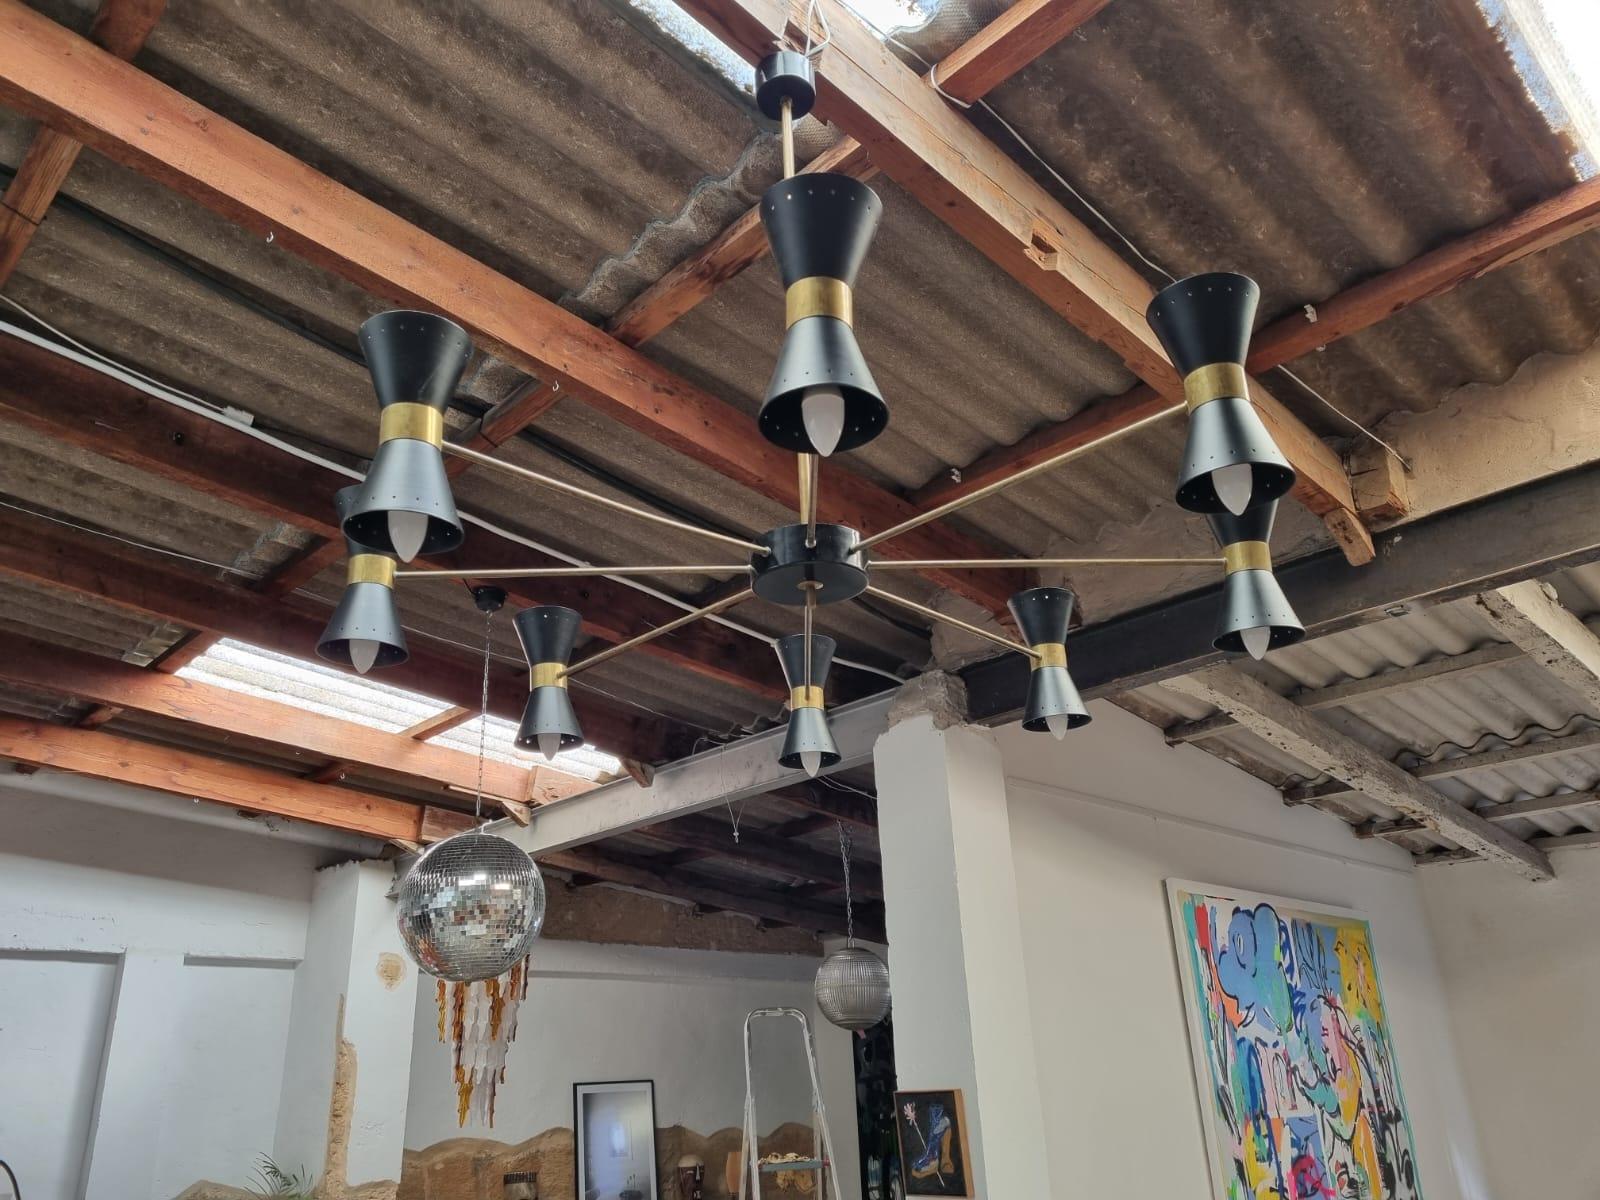 Italian Stilnovo lamp from the 1950s in the style of Sarfatti Stilnovo, it is made of 8 arms and lampshades, 16 bulb sockets with new electrical cables and a beautiful patinated brass, very good vintage condition, partially restored with some signs